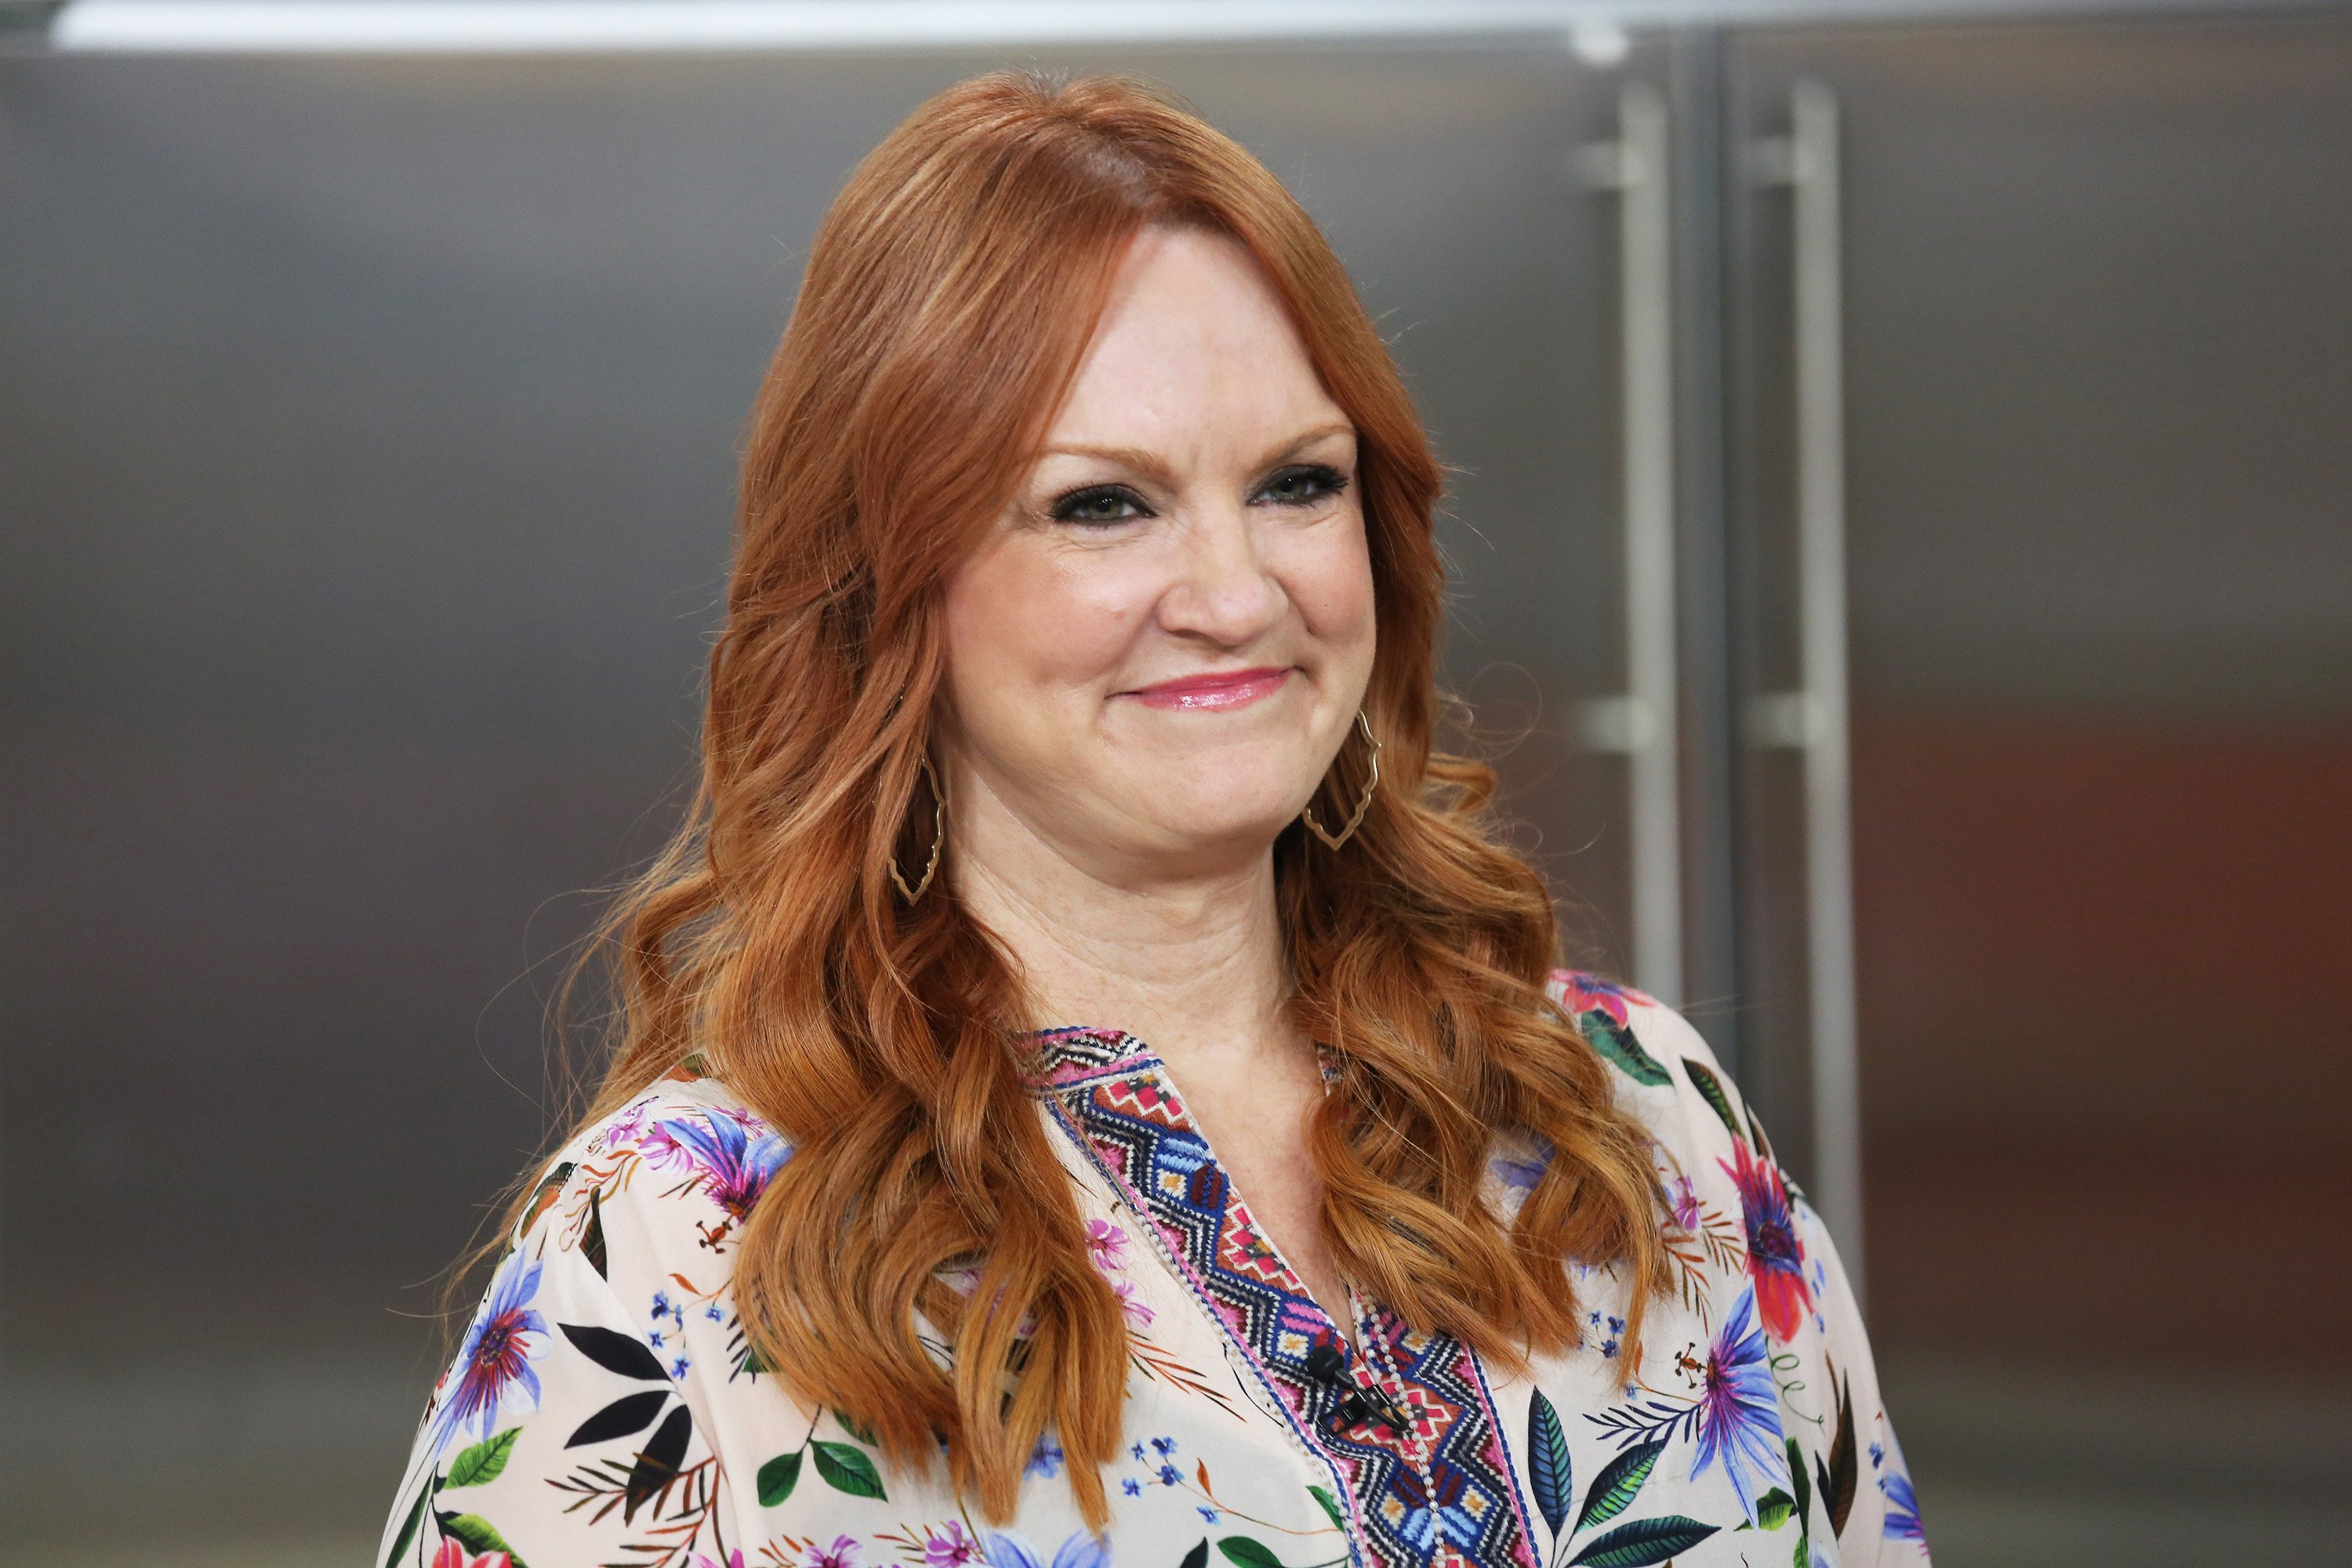 Ree Drummond stands in the kitchen on the Today show.